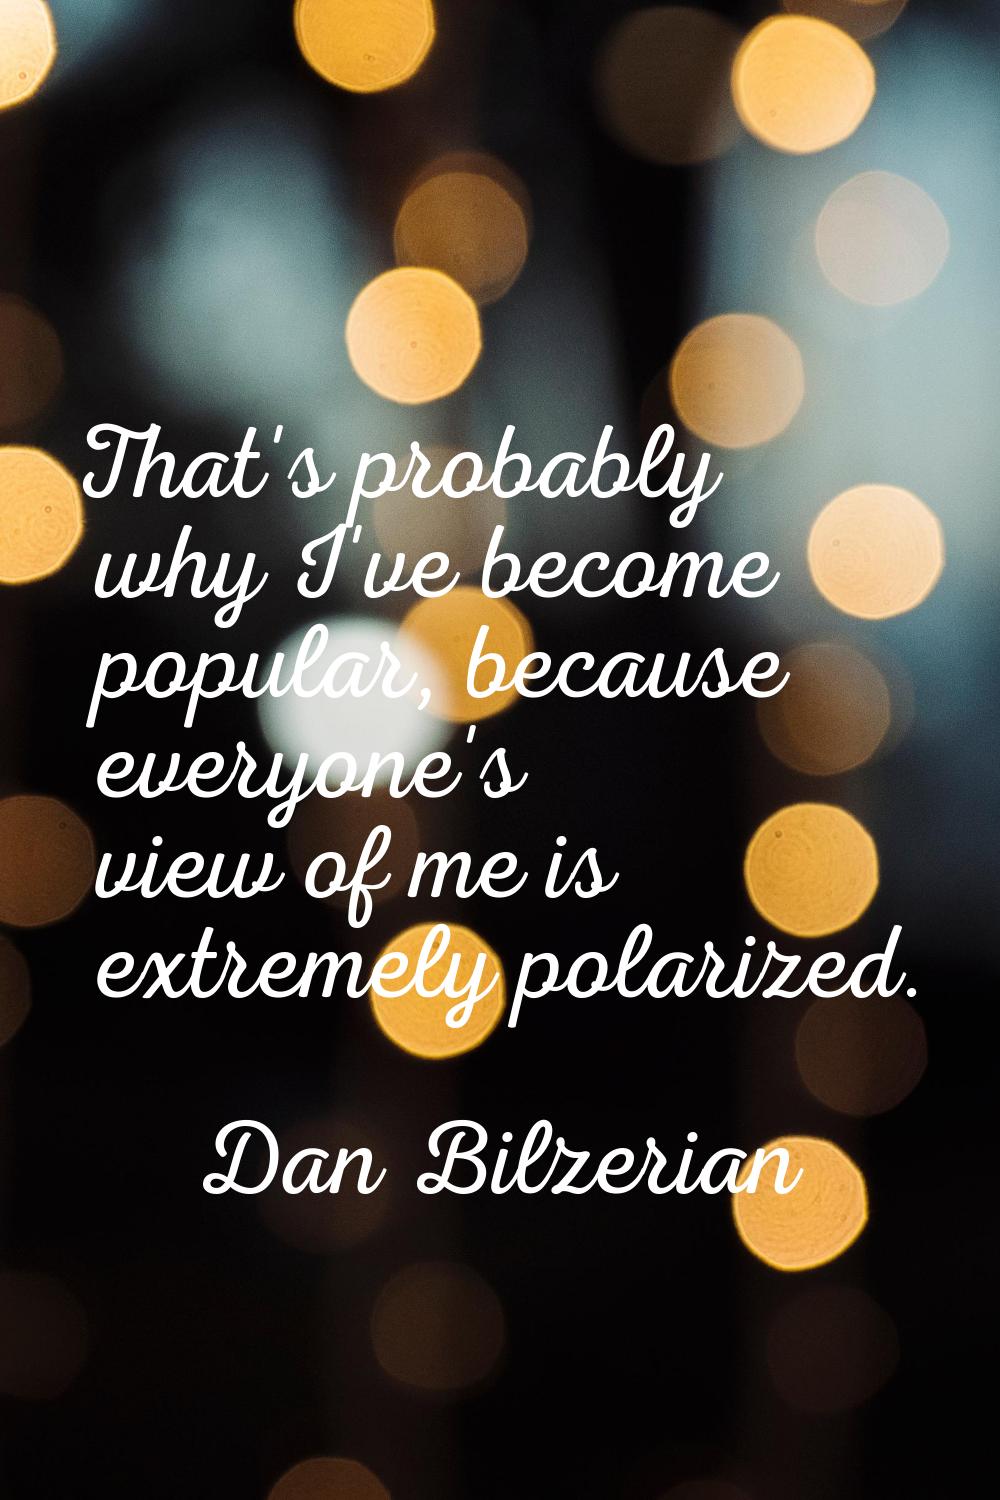 That's probably why I've become popular, because everyone's view of me is extremely polarized.